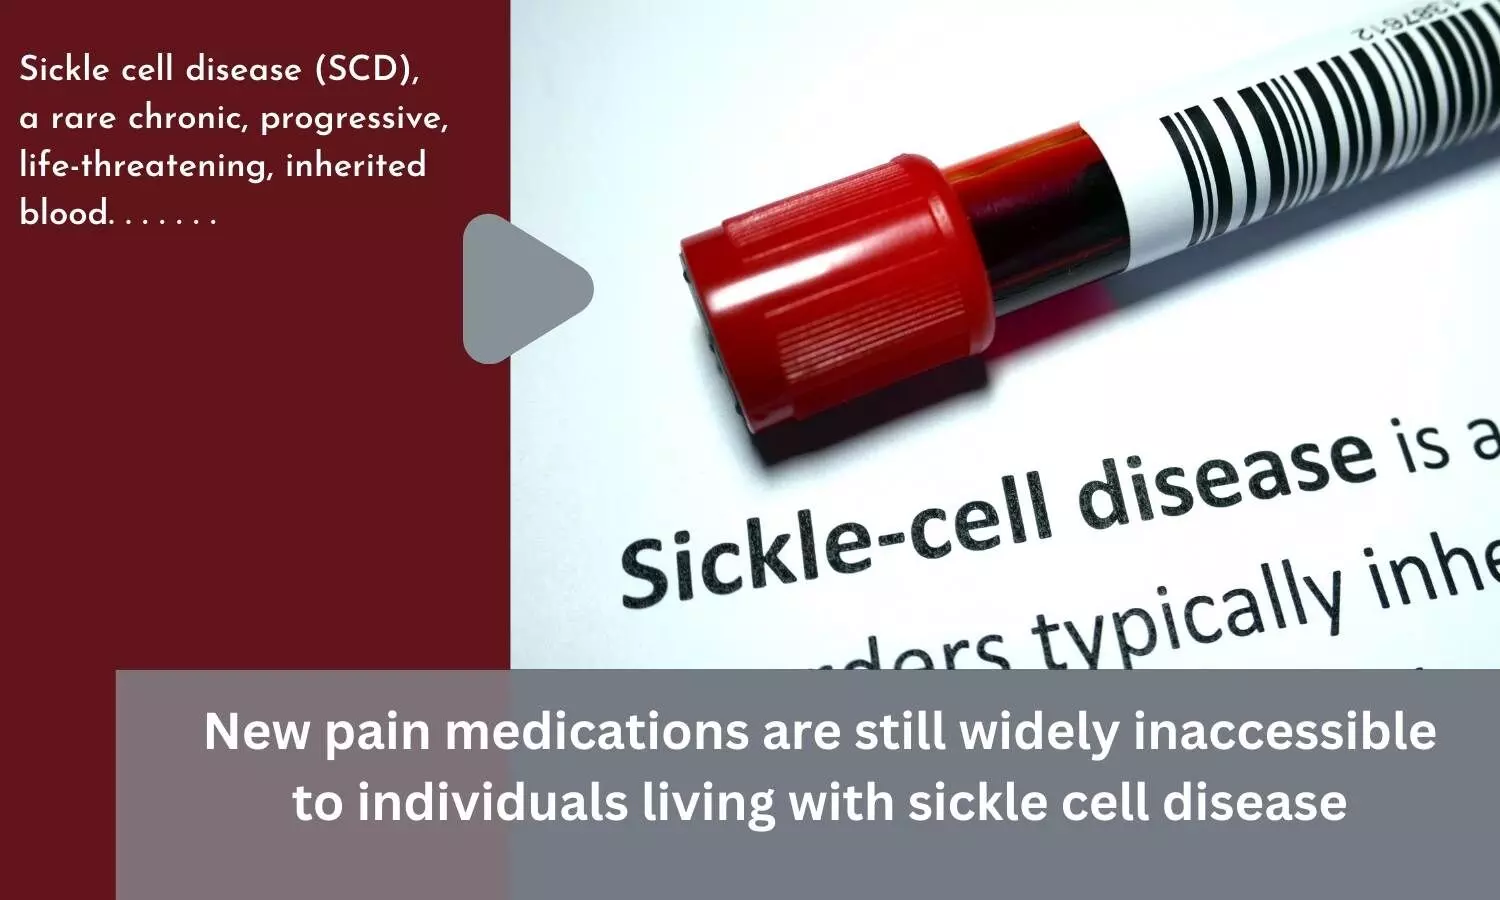 New pain medications are still widely inaccessible to individuals living with sickle cell disease